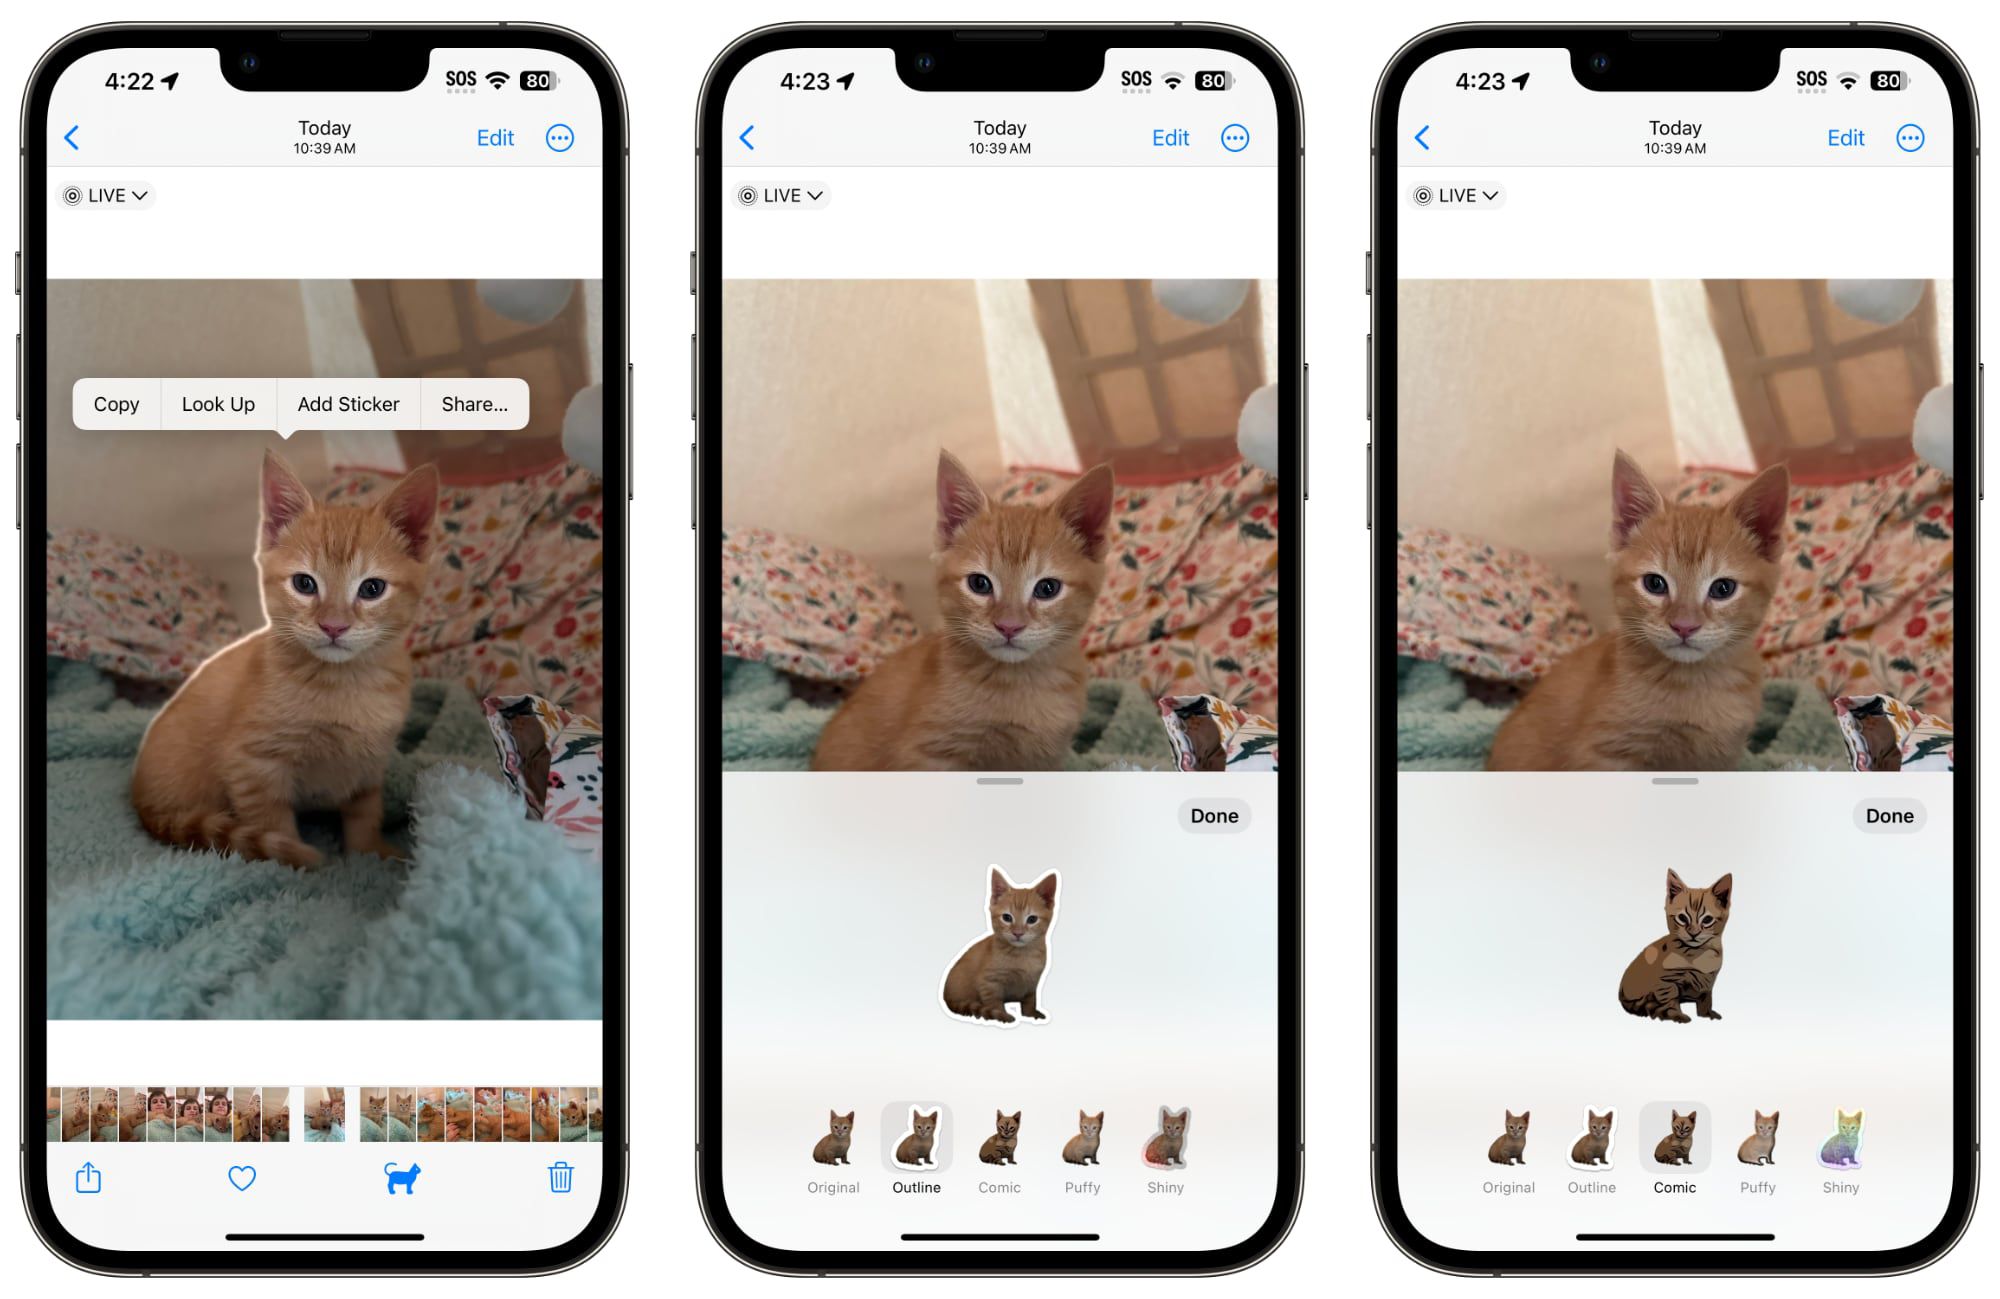 You Can Turn Your Photos Into Animated Stickers With iOS 17 - macrumors.com